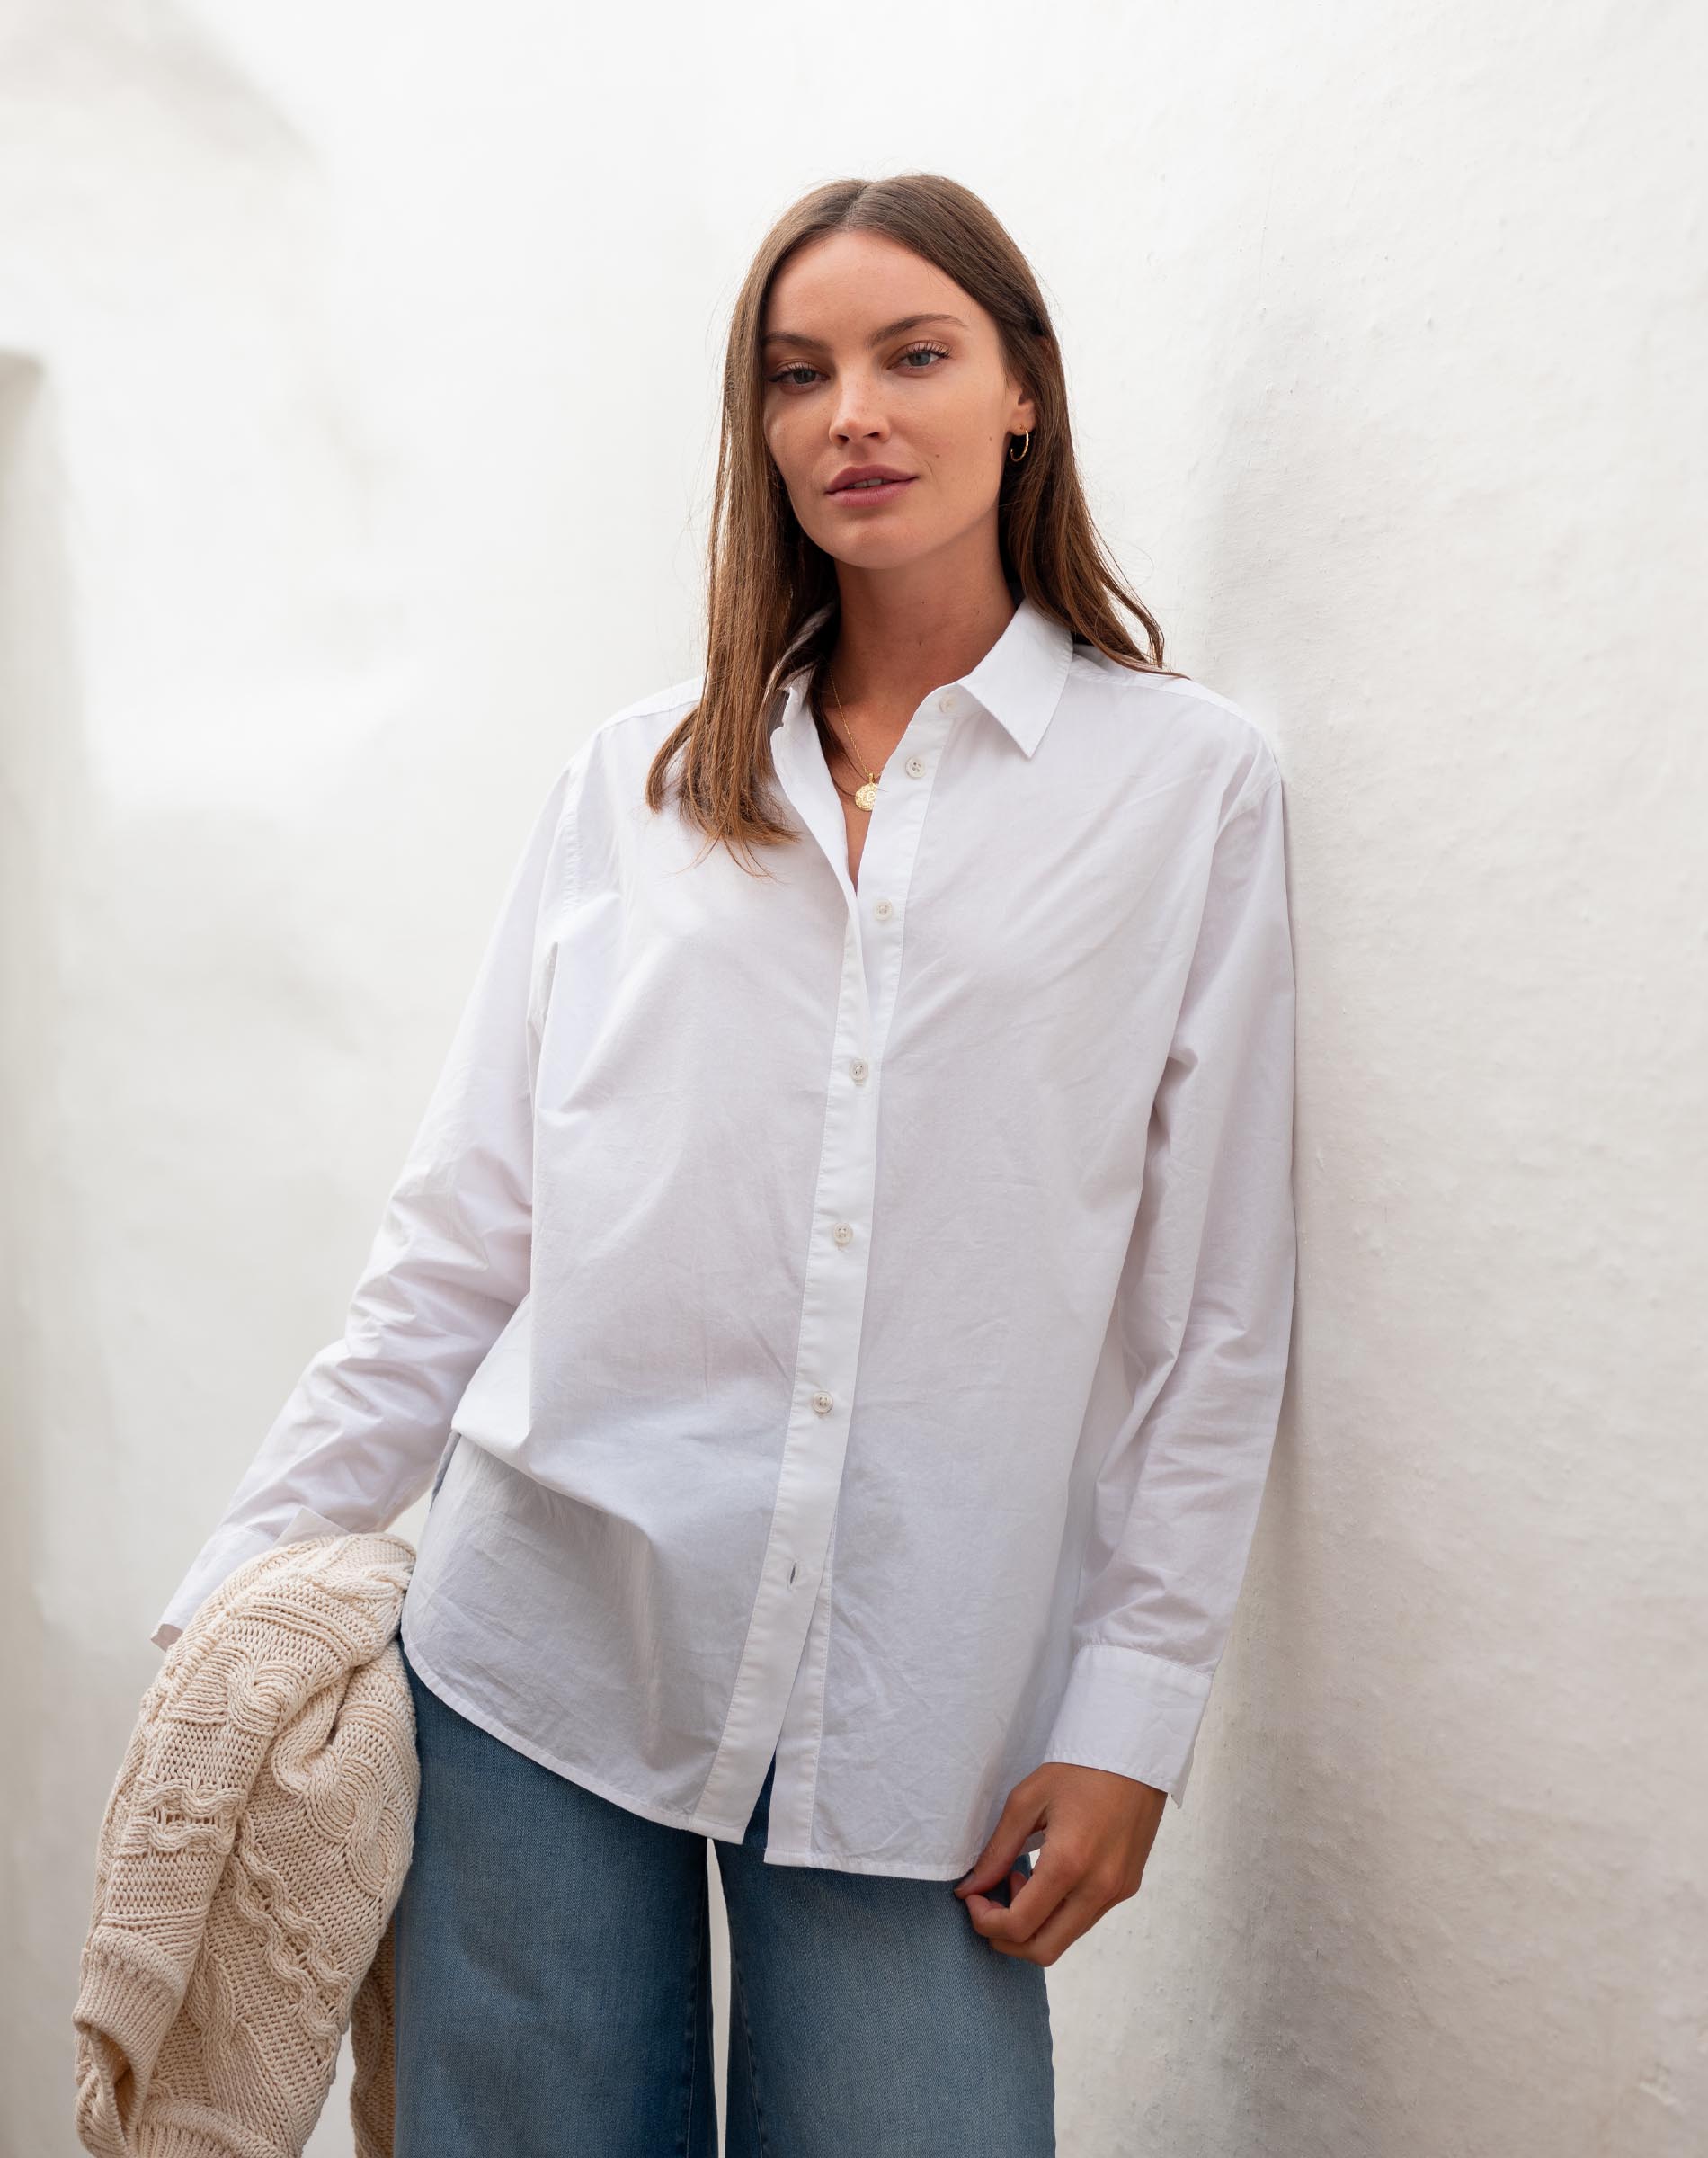 Women's White Breathable Relaxed Fit Button Up Shirt Front View Travel Destination Look